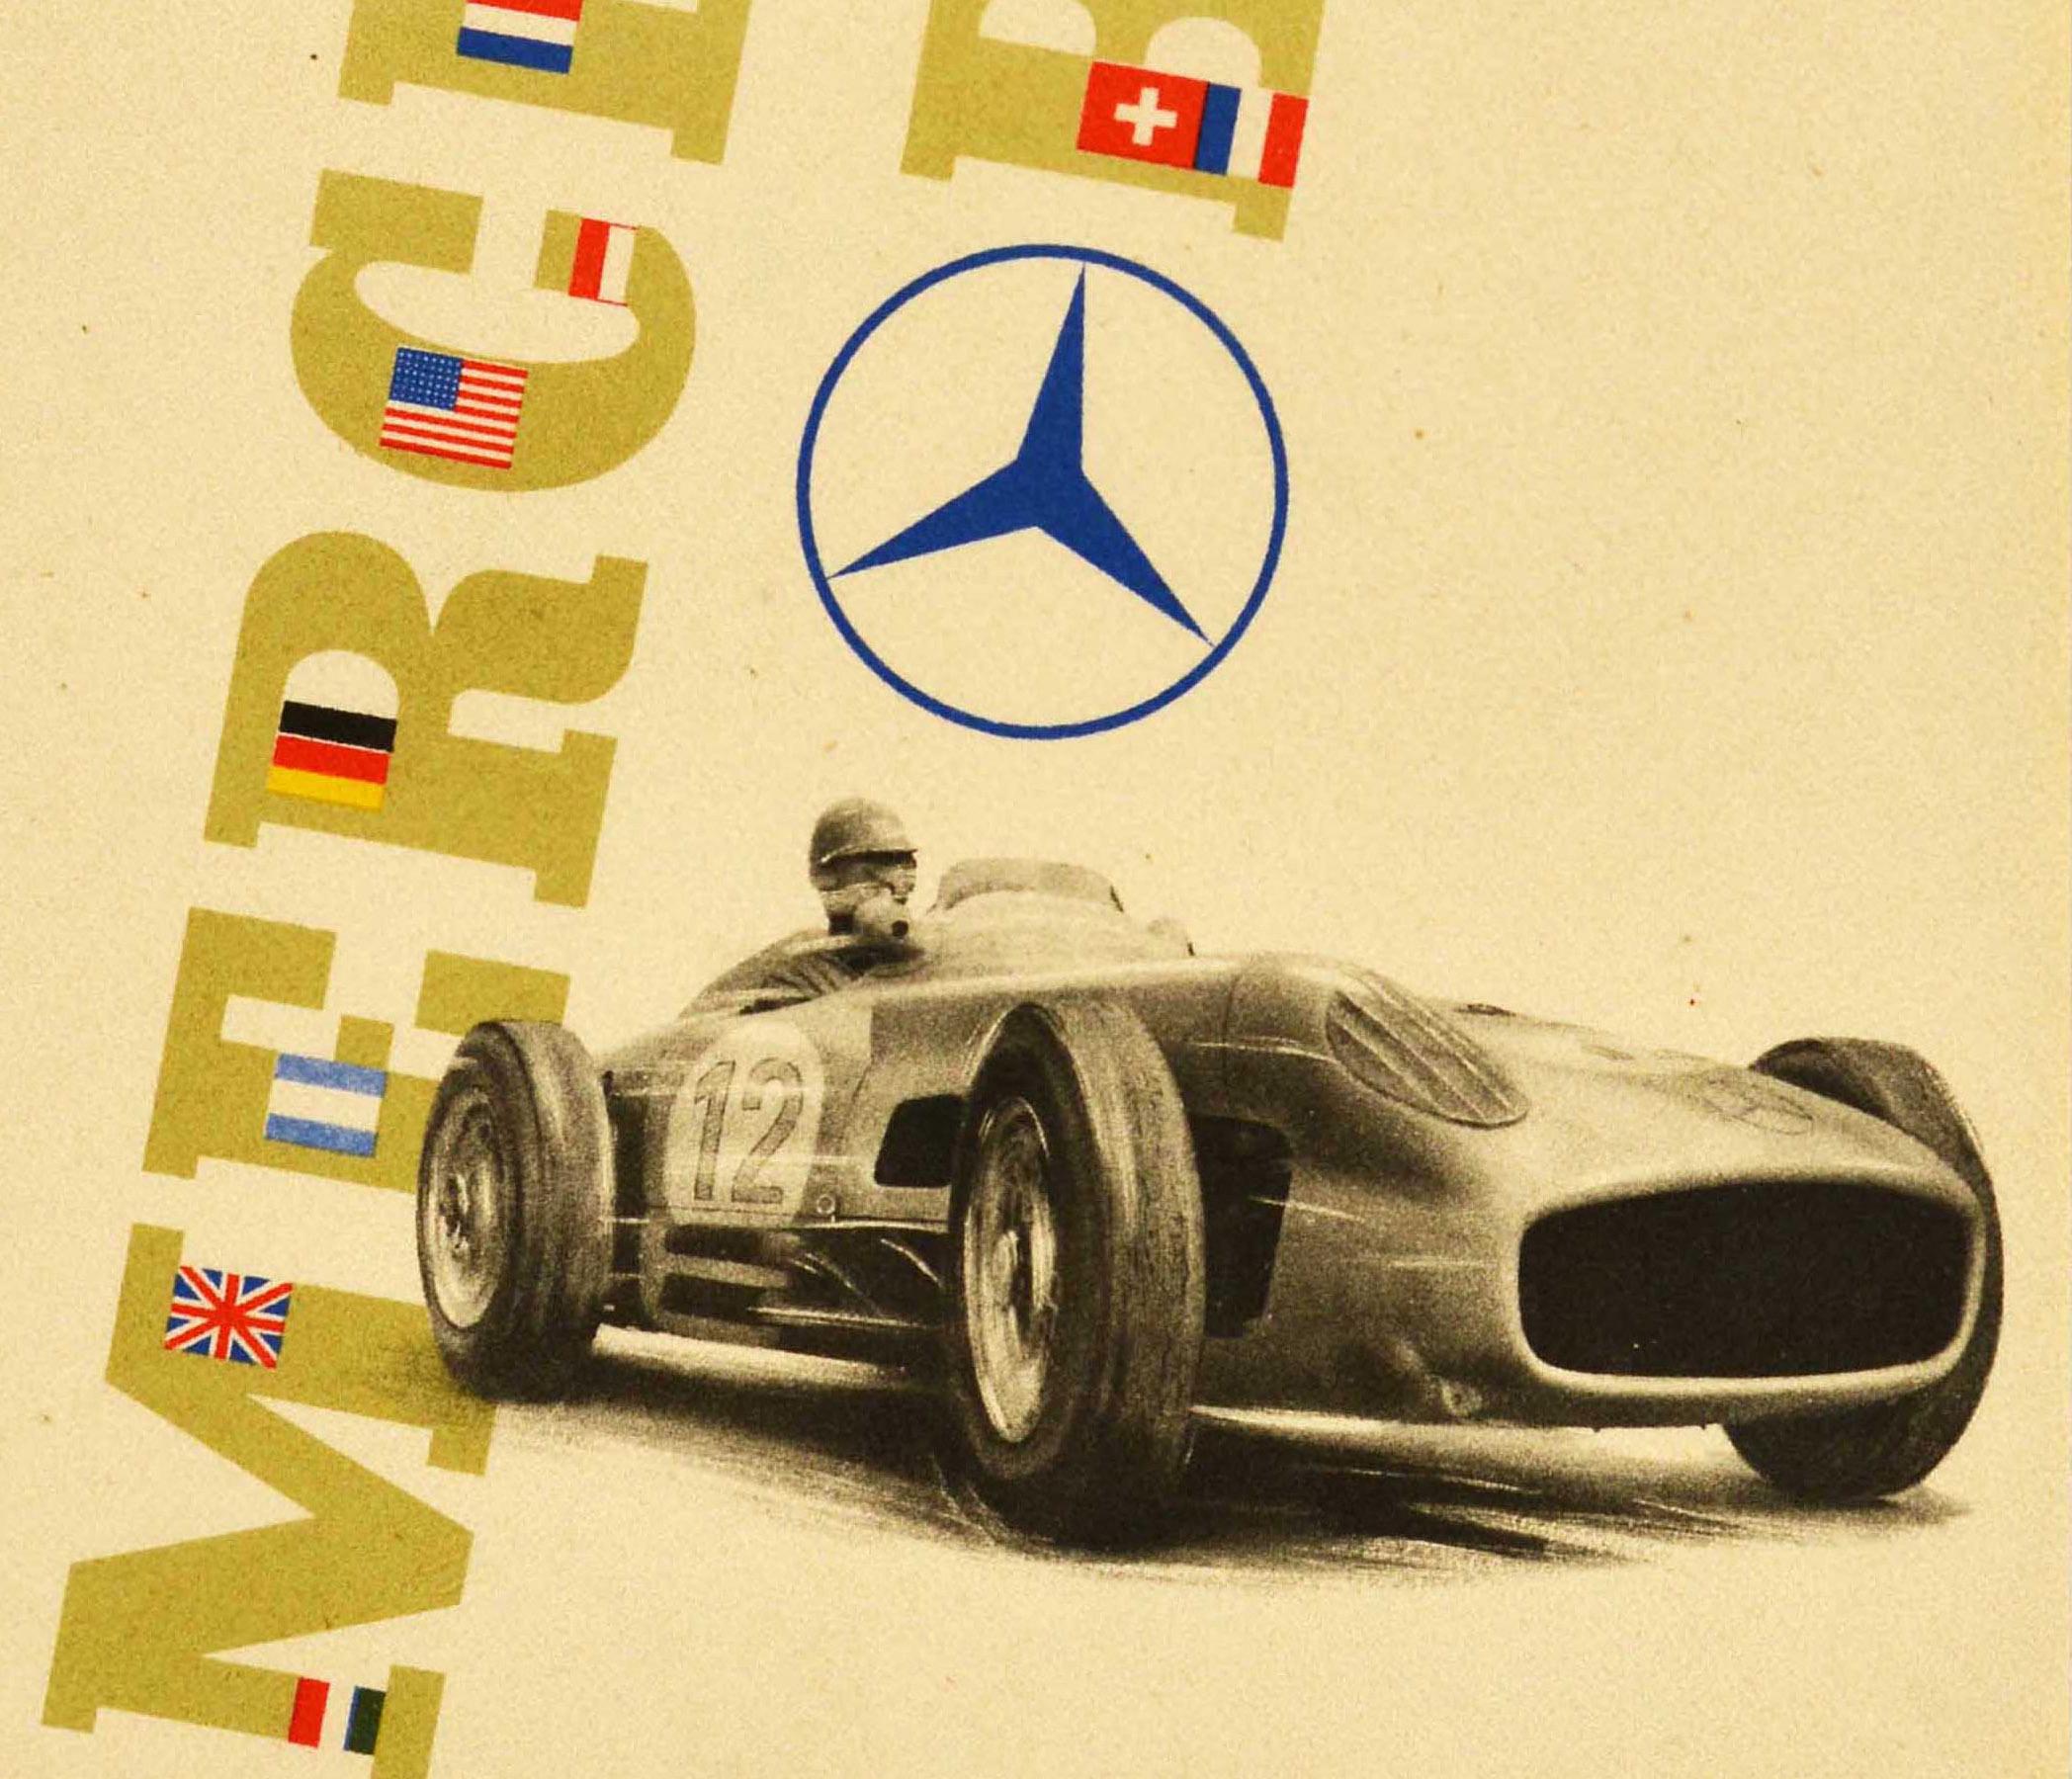 Original Vintage Poster Mercedes Benz England Grand Prix Victory Stirling Moss - Print by Unknown